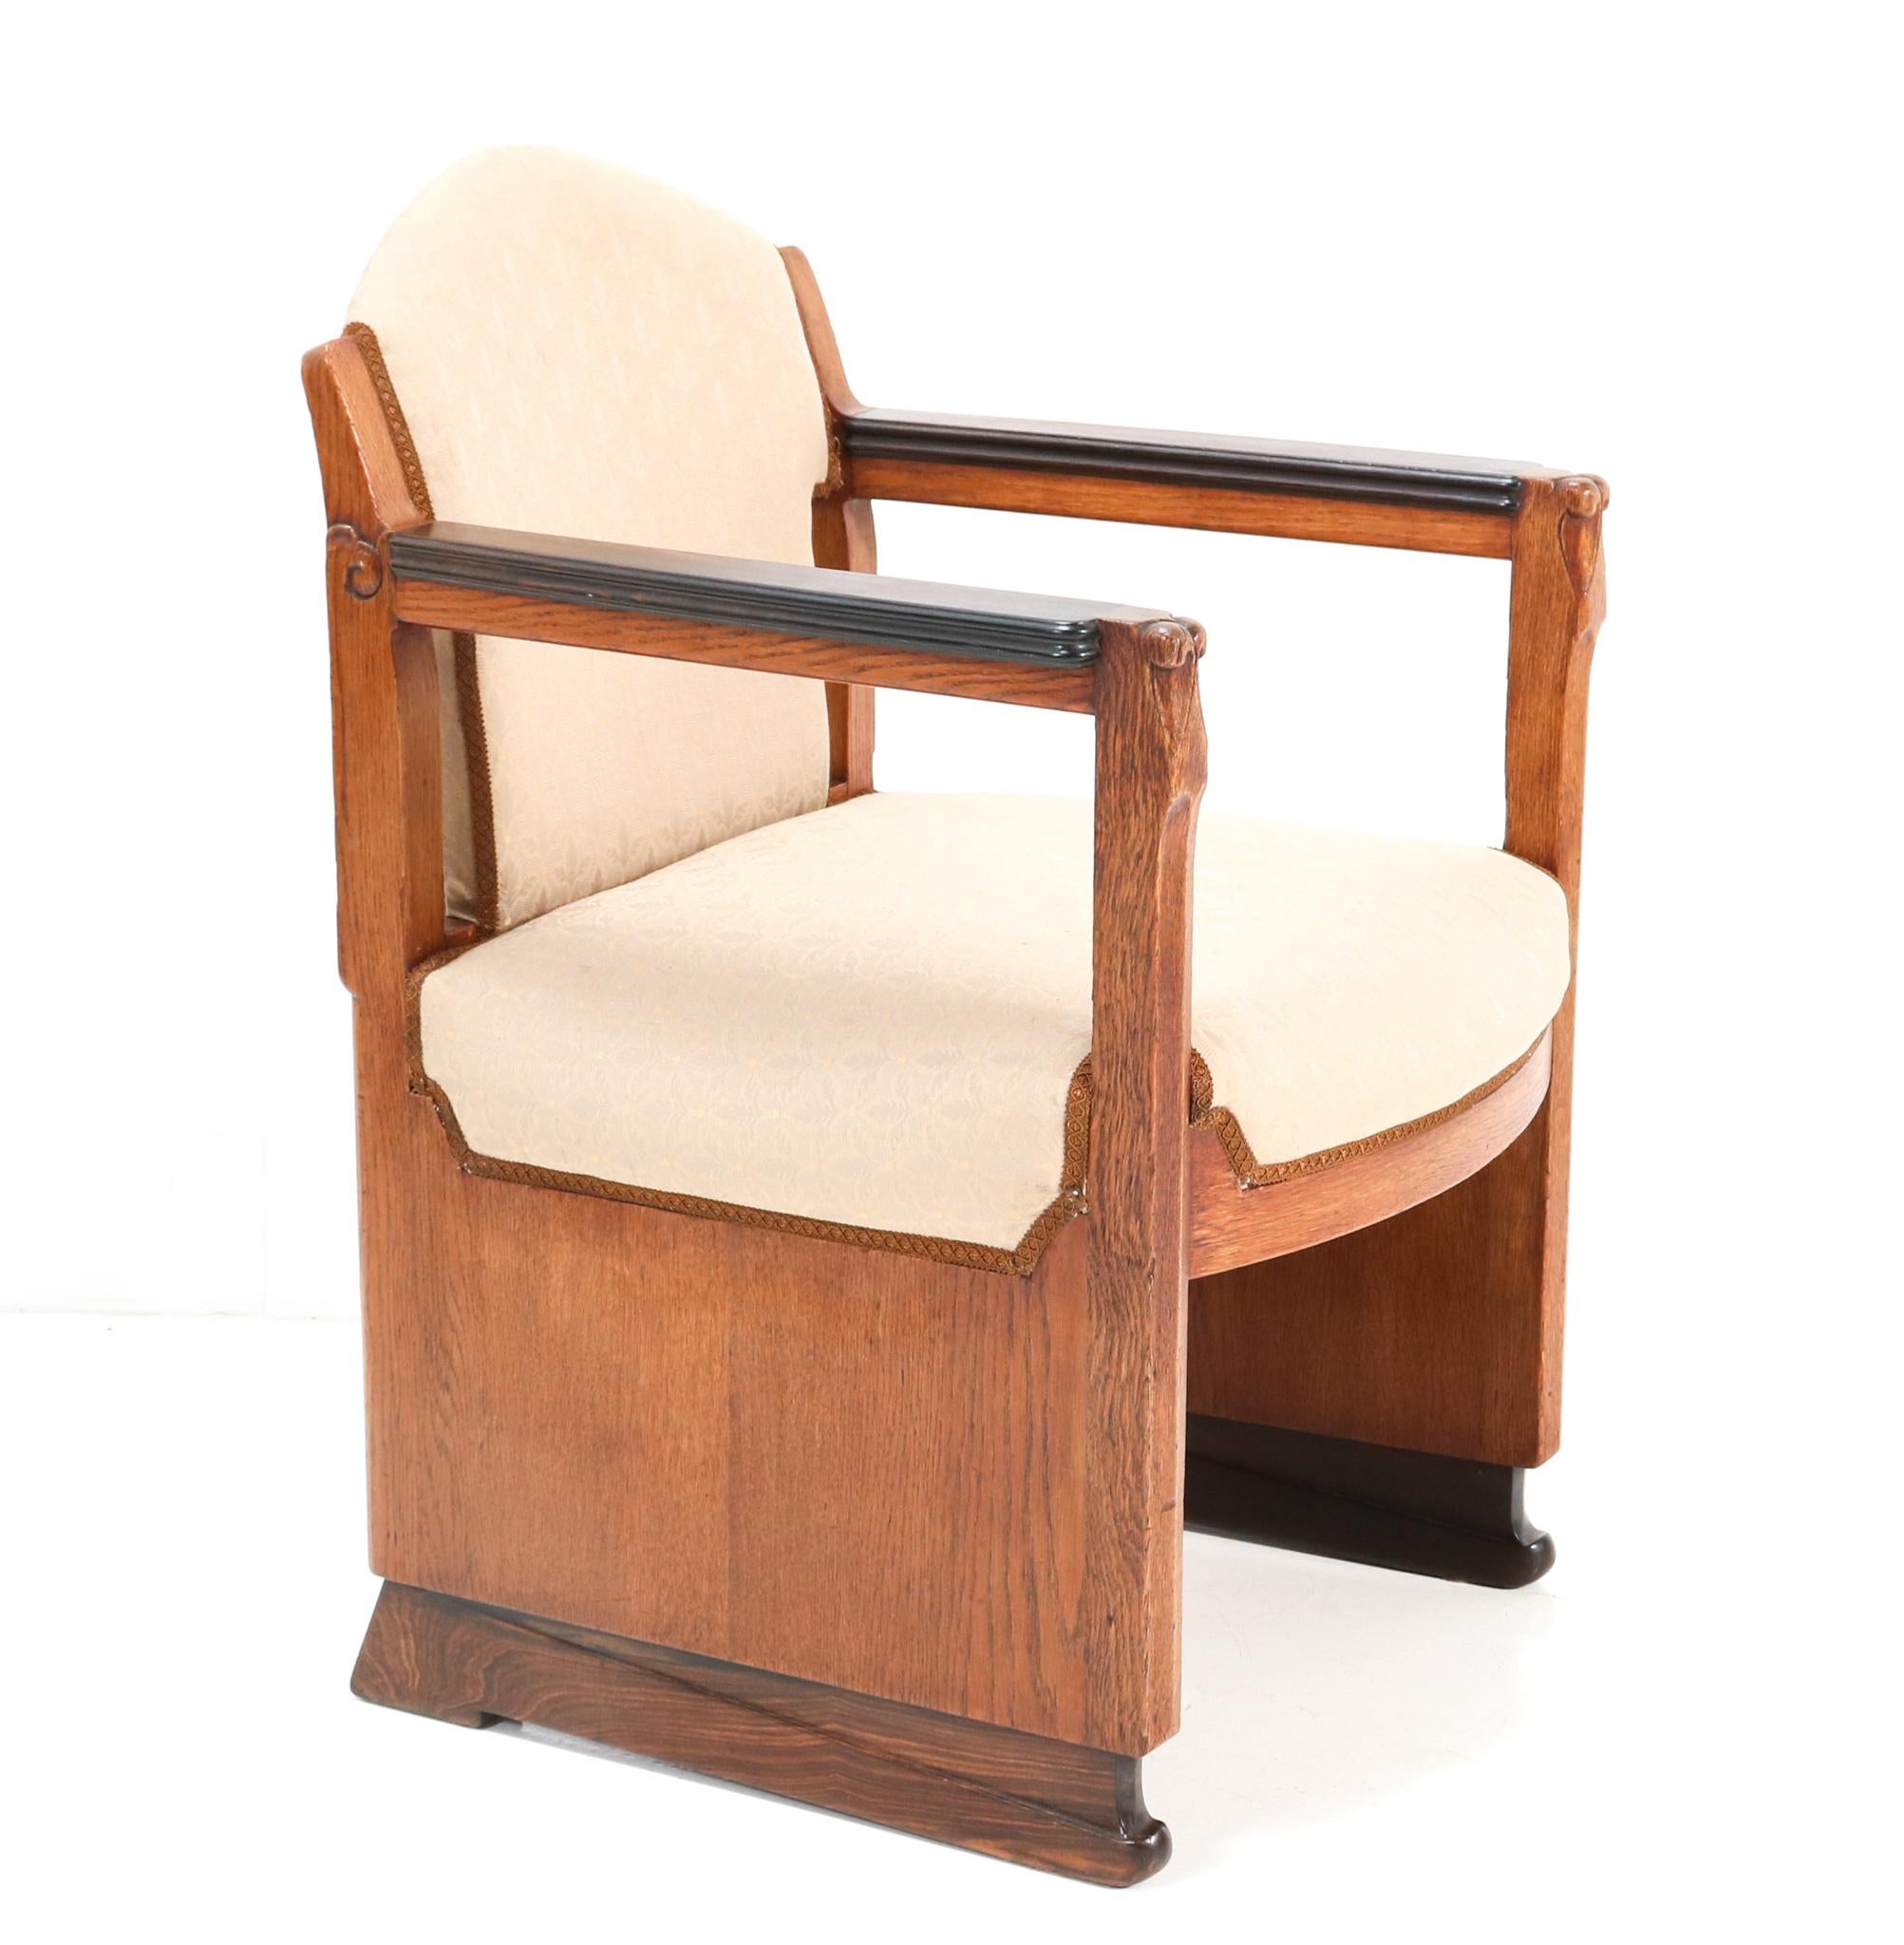 Fabric Two Oak Art Deco Amsterdamse School Armchairs by Hildo Krop for 't Woonhuys For Sale